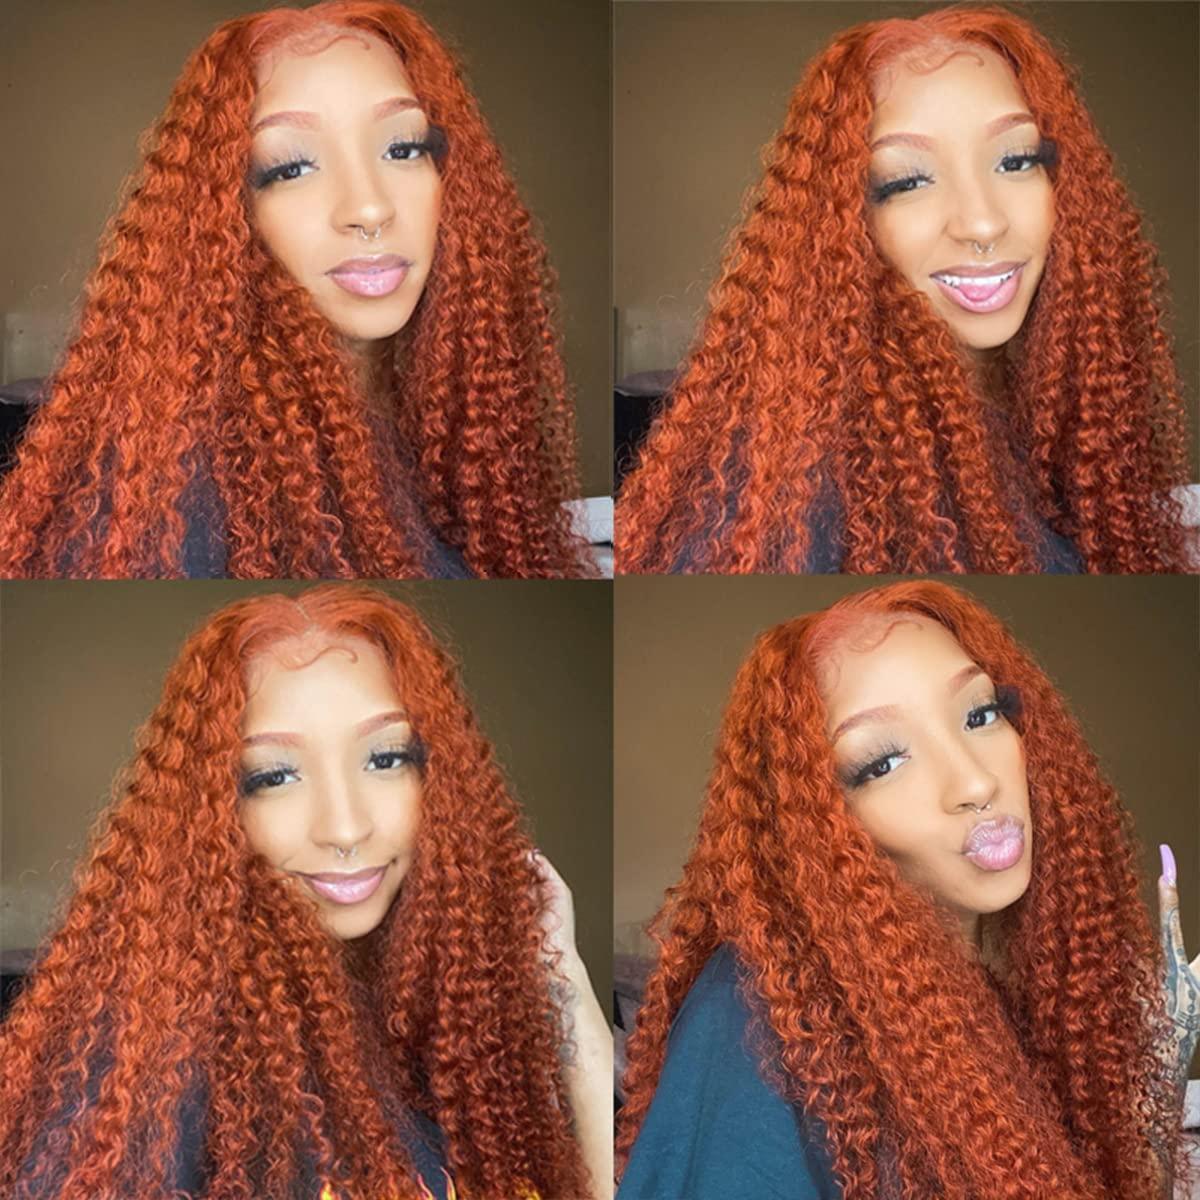 Emilyhair #350 Curly Wigs 32 Inch Deep Wave 13X4 Lace Front Wig Red Copper